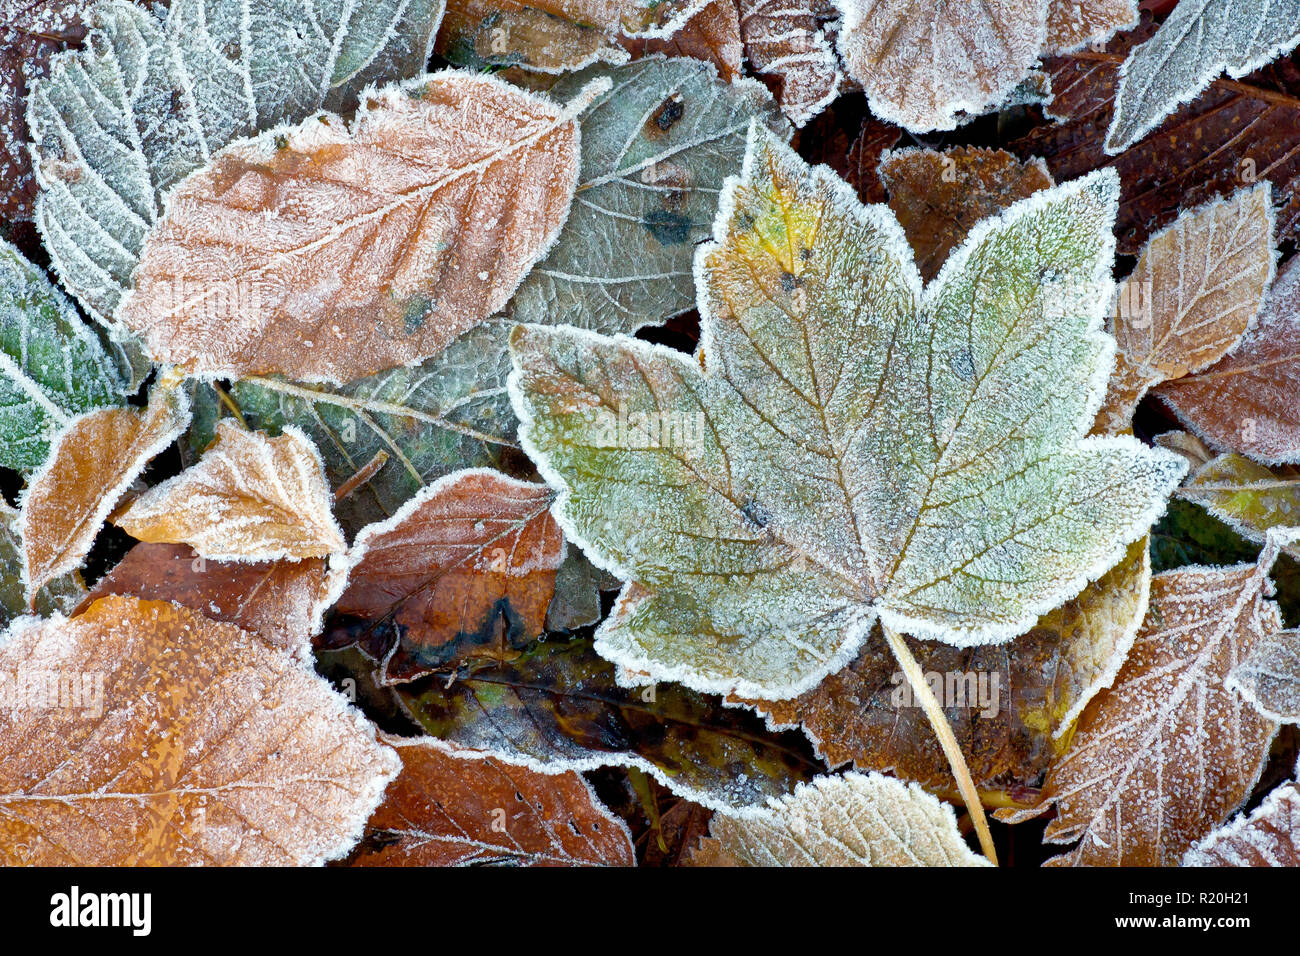 Autumn leaf litter covered with a light frost from the first sub-zero night of the year. Stock Photo